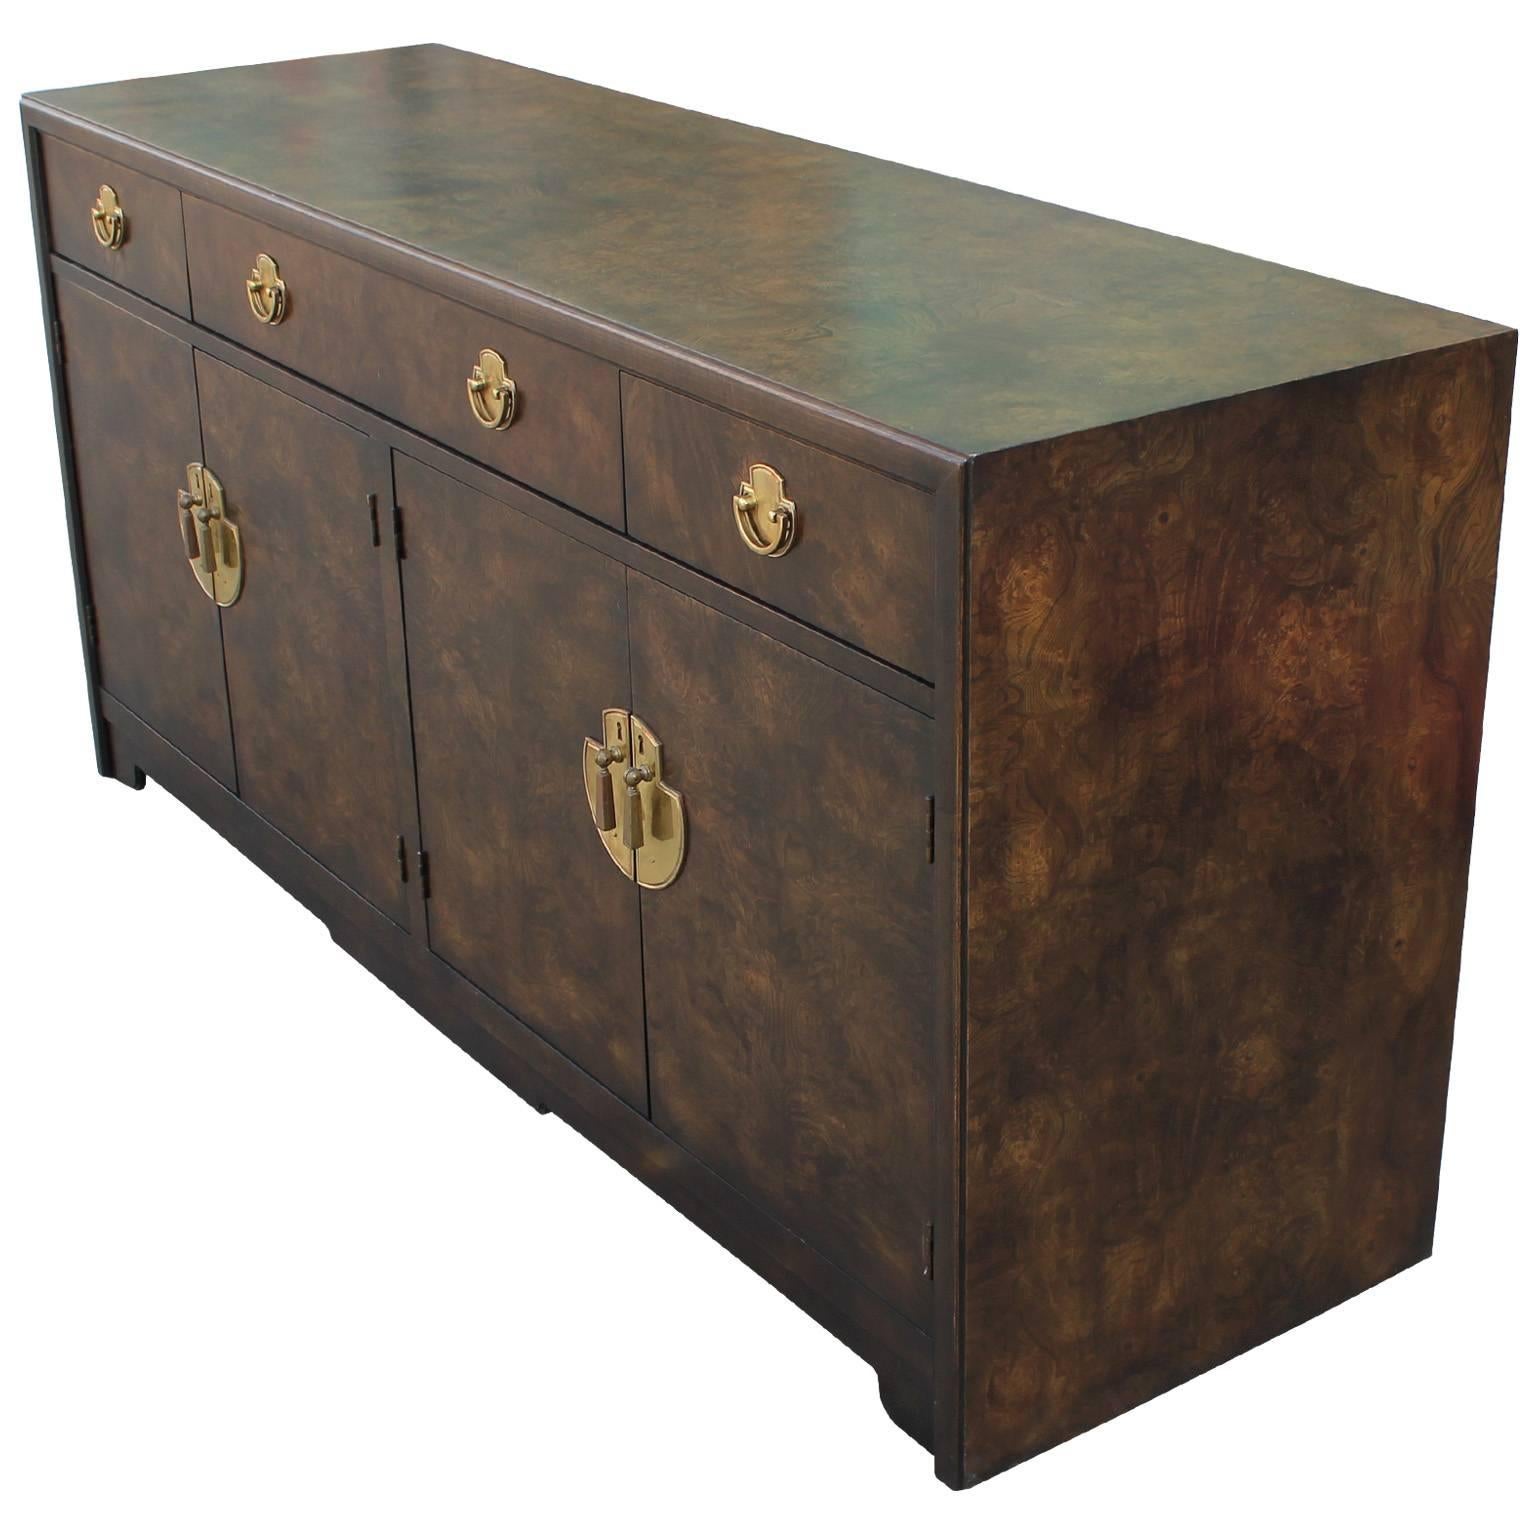 Glamorous burl wood dresser or sideboard. Nicely detailed brass hardware finish the piece. Cabinet drawers open to reveal drawers. Perfect in a Hollywood Regency, transitional, or Mid-Century space. In excellent condition.